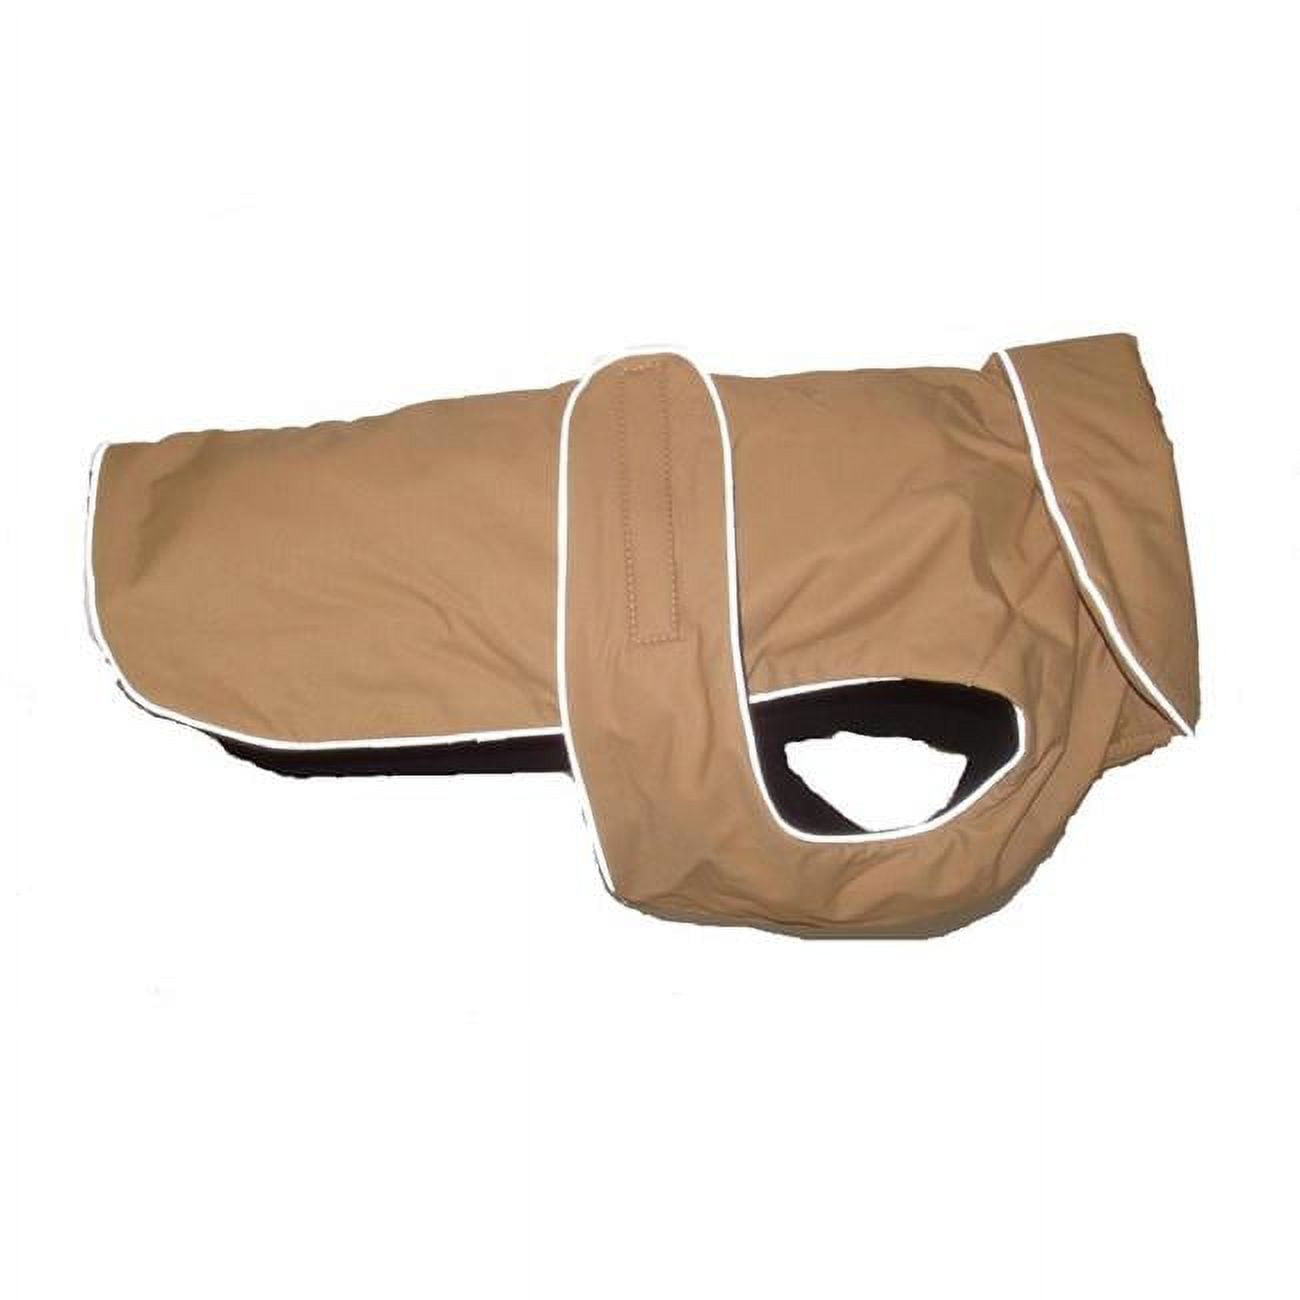 Picture of A Pets World 08192911-20 Weather Resistant Fleece Lined Dog Coat, Tan